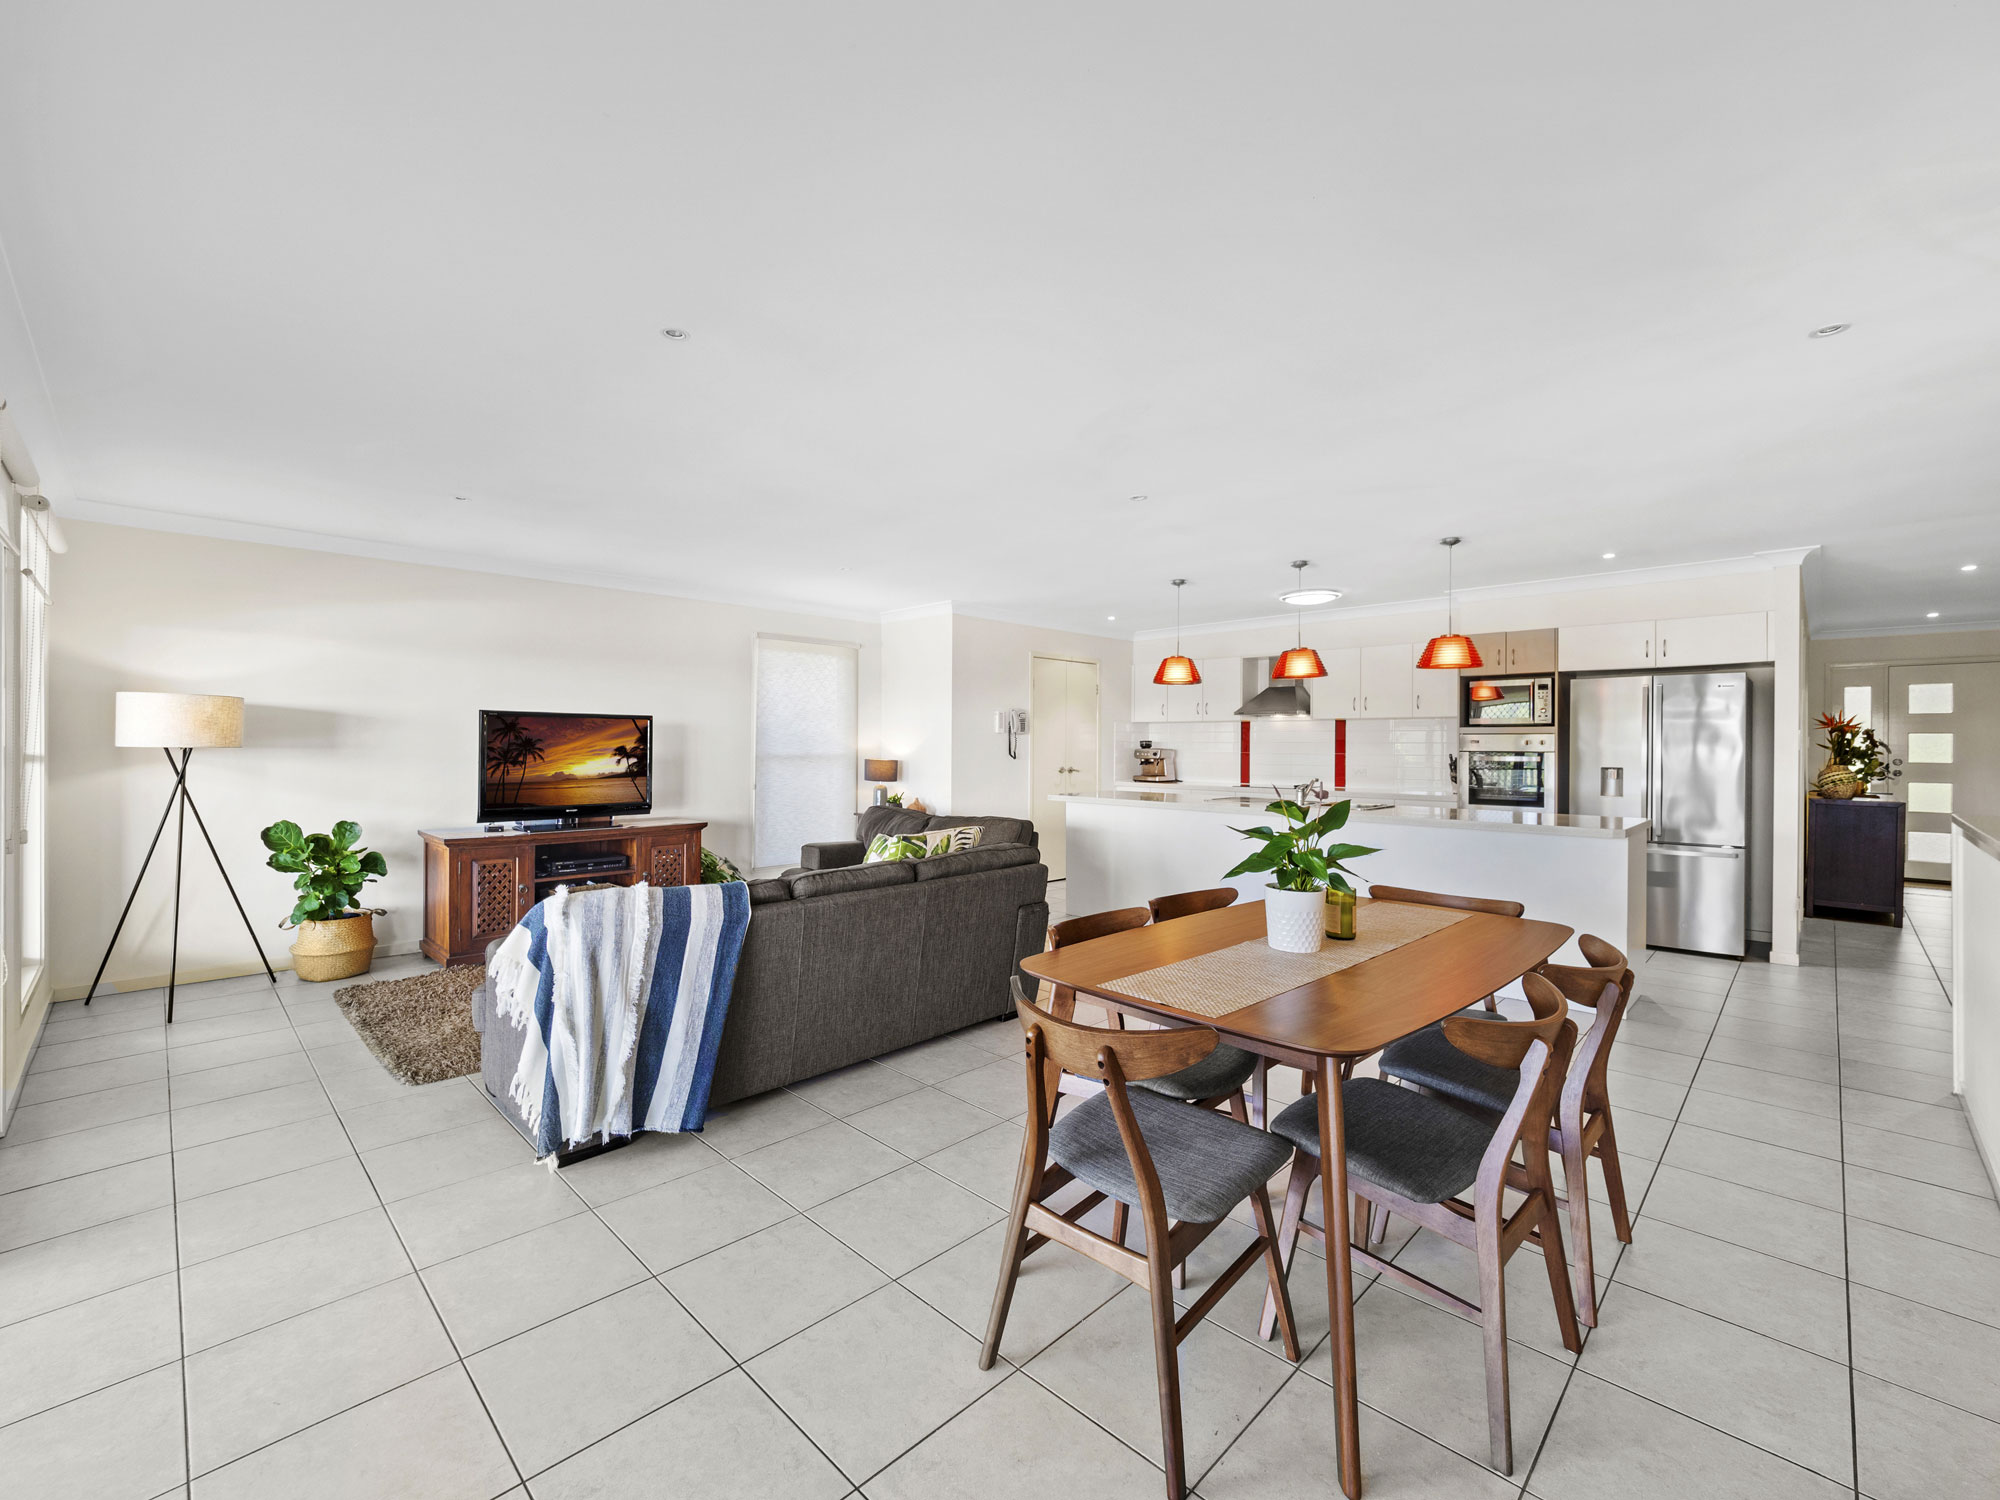 Capturing the open plan living of the home for sale at Mitchelton